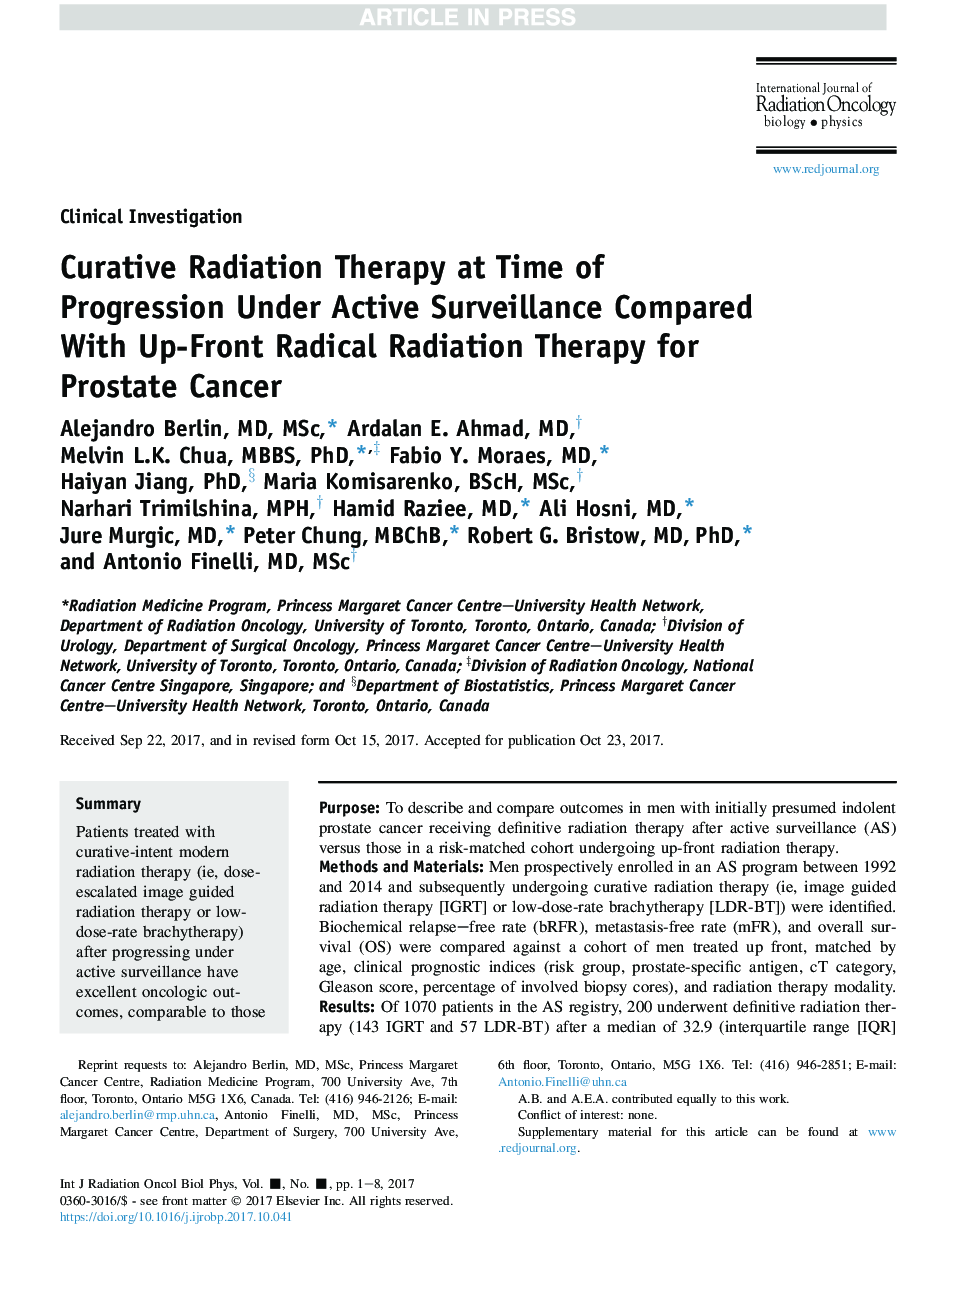 Curative Radiation Therapy at Time of Progression Under Active Surveillance Compared With Up-front Radical Radiation Therapy for Prostate Cancer